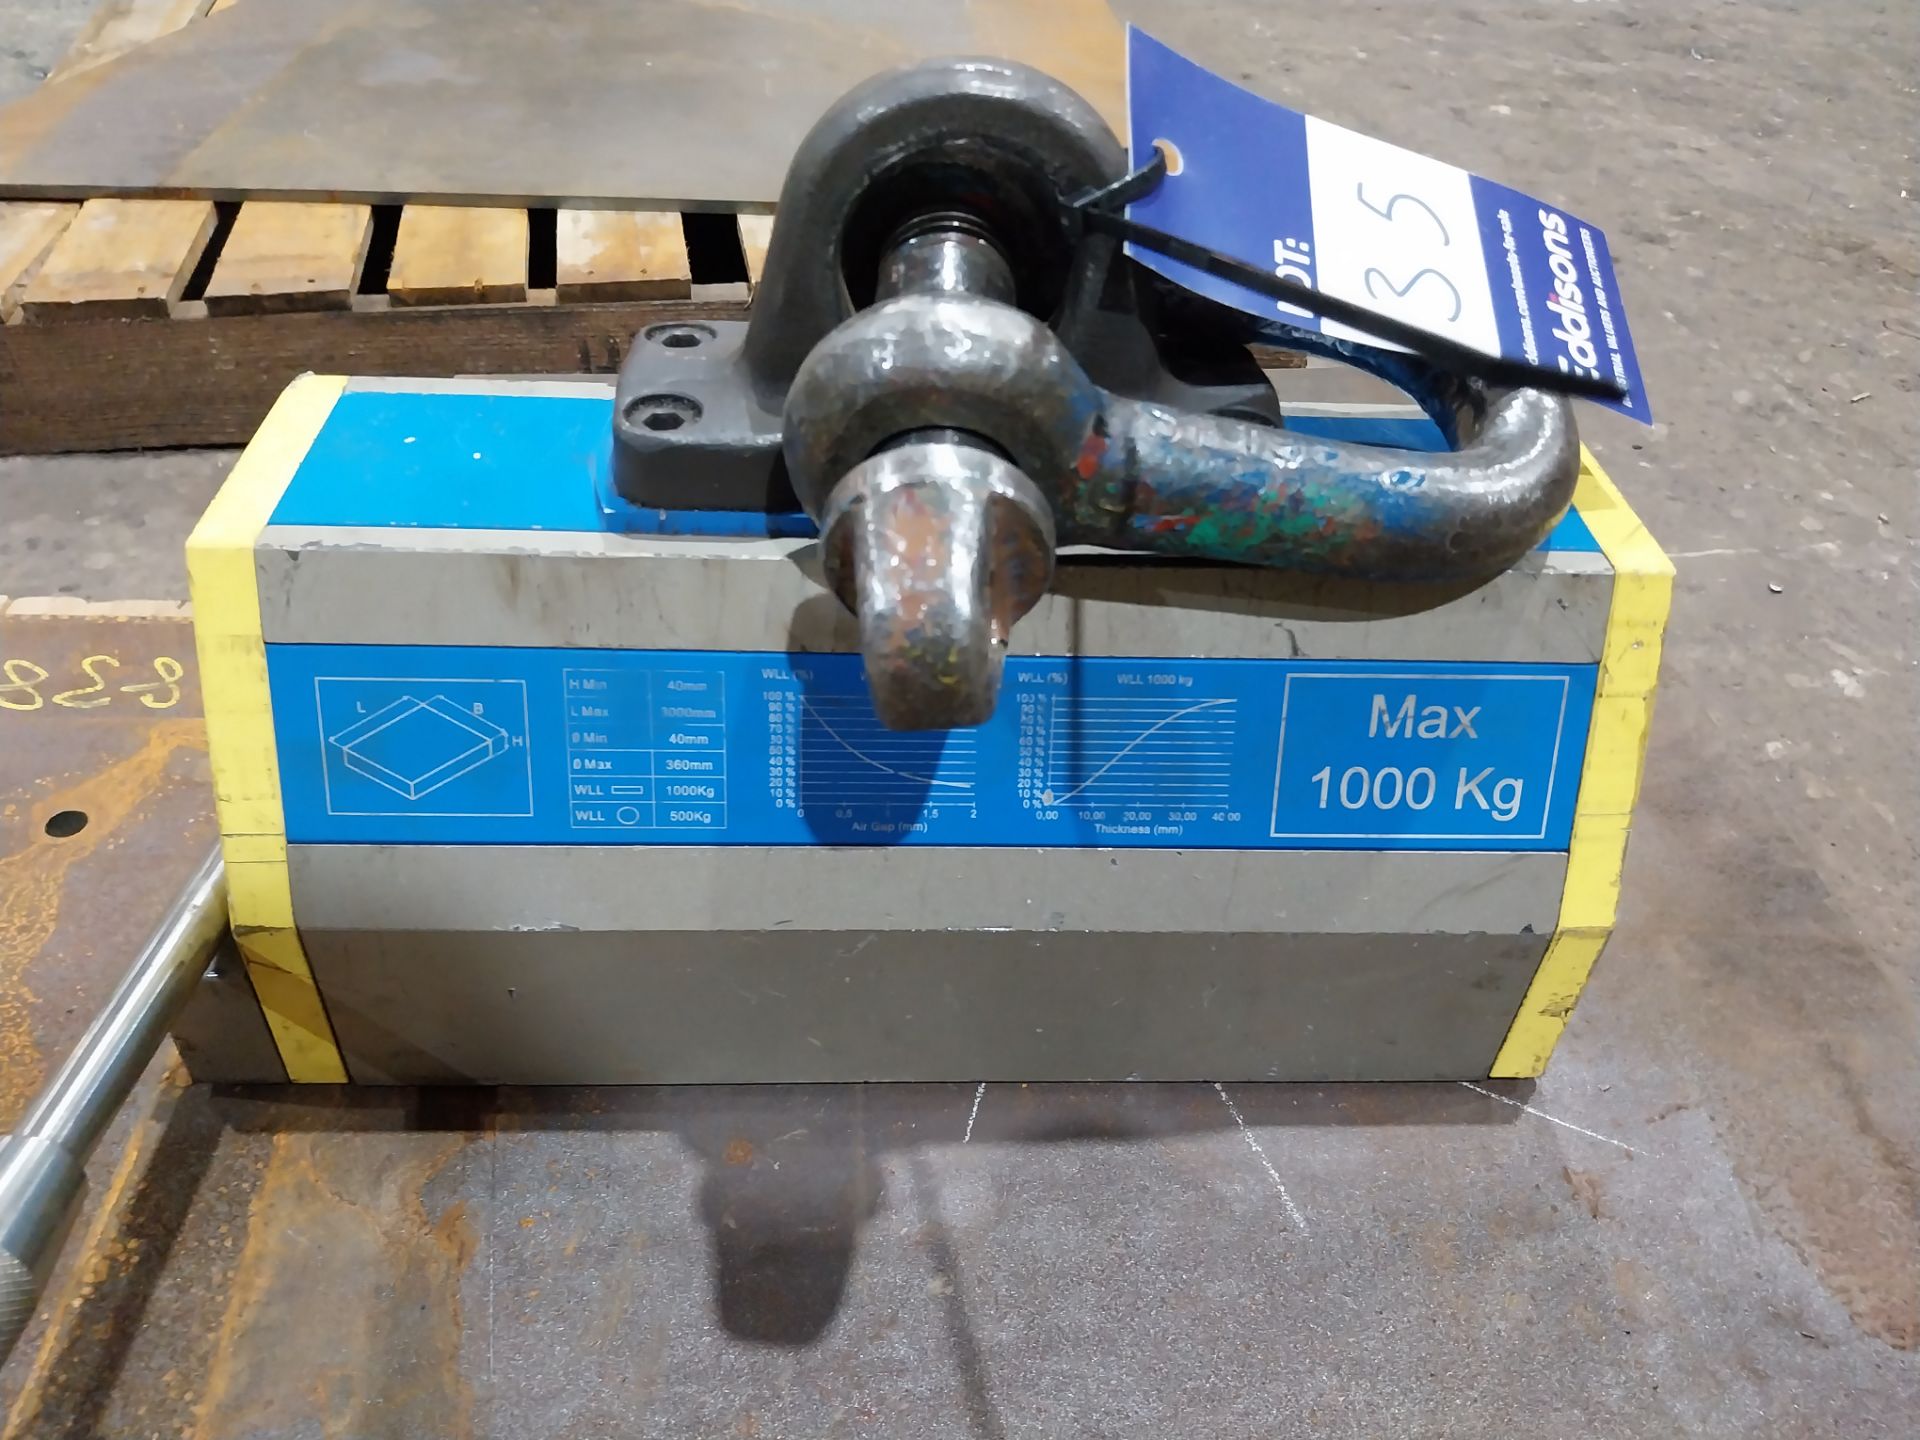 SPD MHM-IT-1000 magnetic neodymium lever lifter Year 2022 - Image 3 of 4